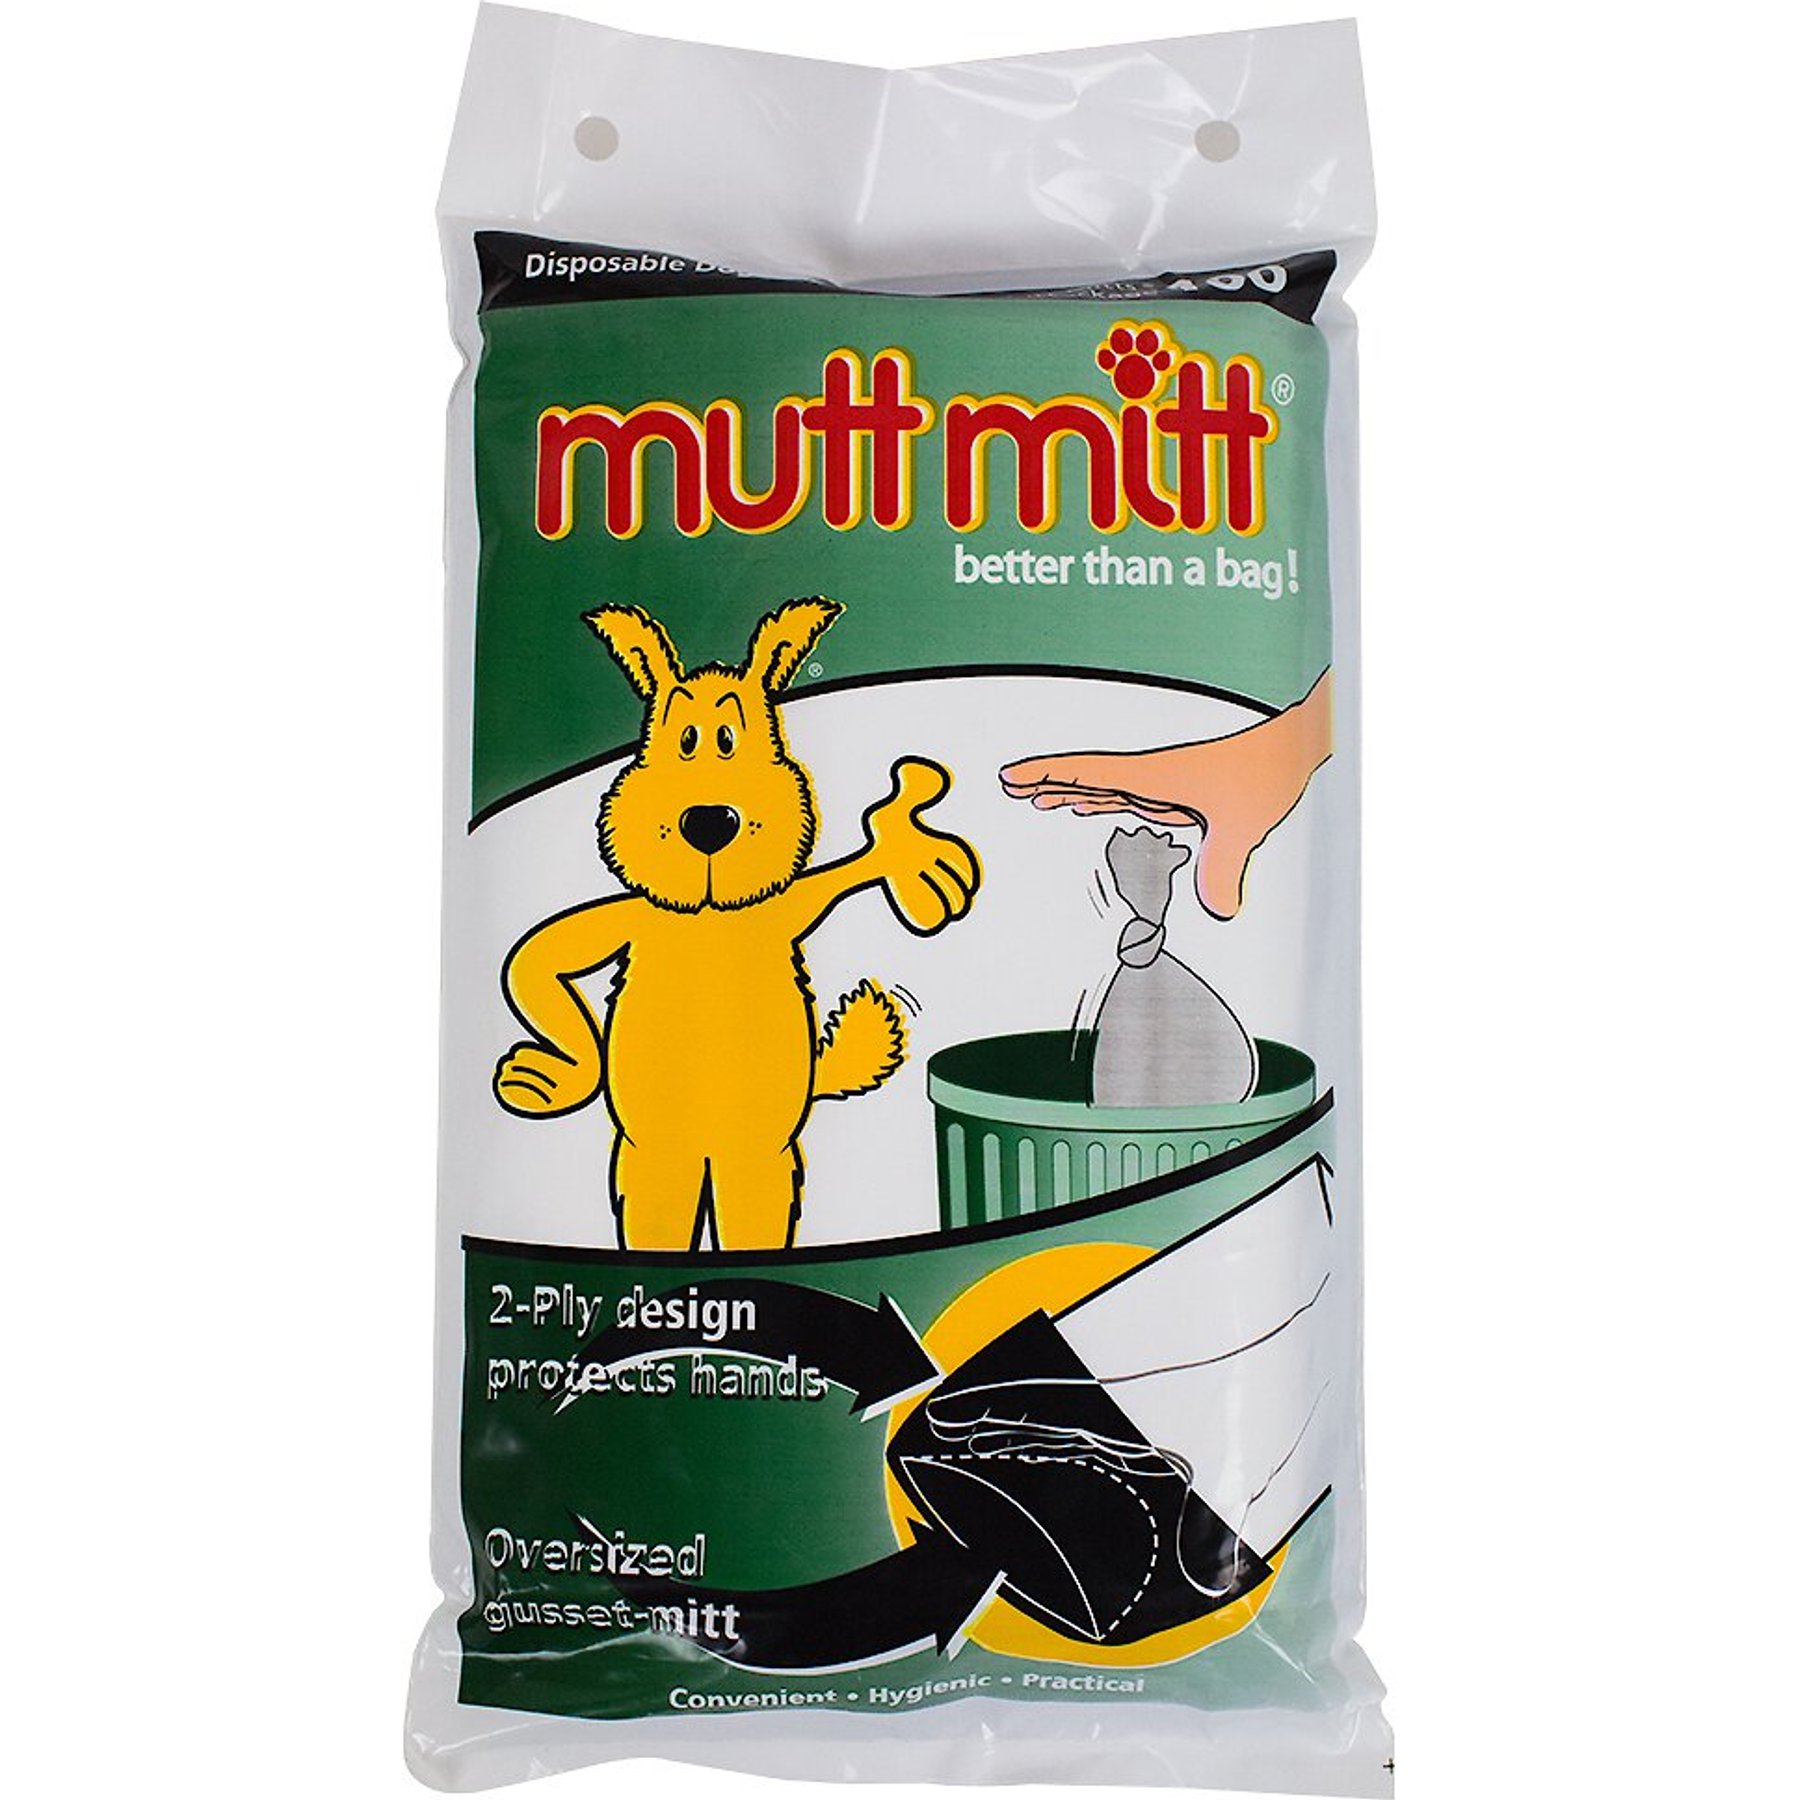 You can get less expensive single ply Mutt Mitts (called Singles).